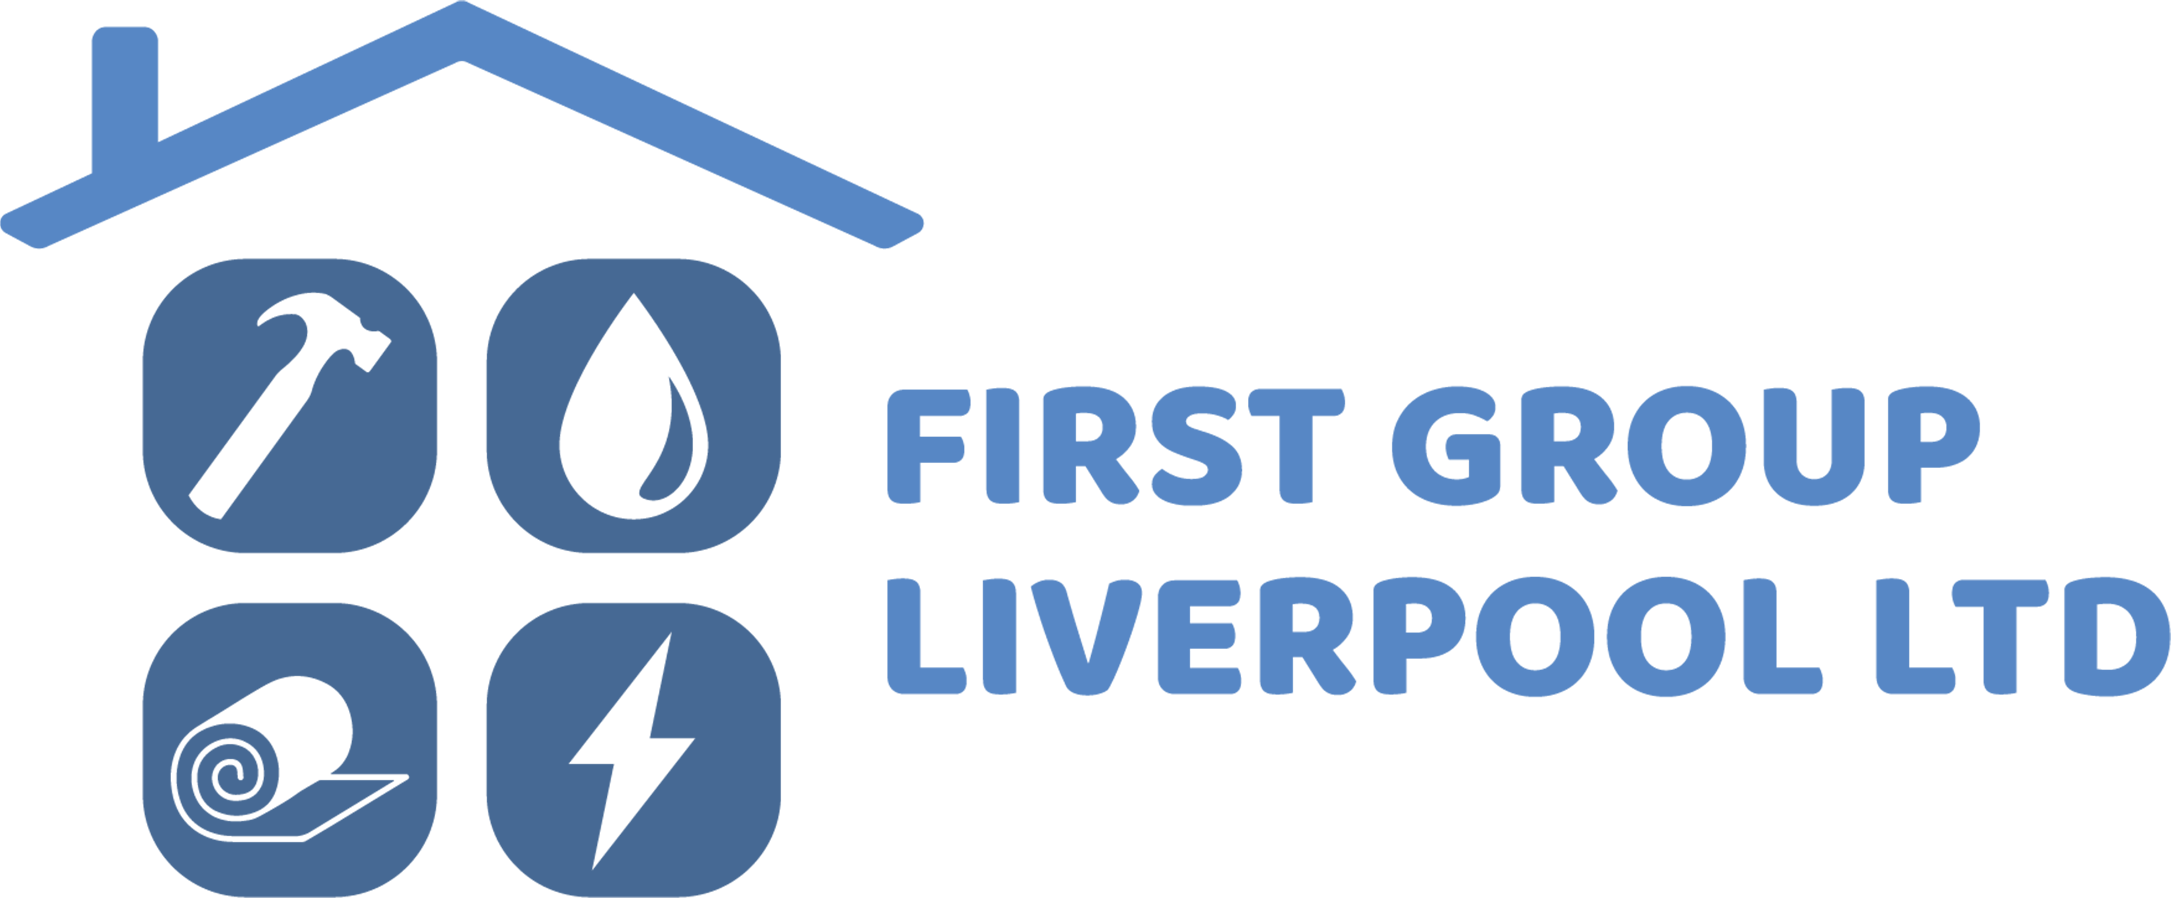 First Group Liverpool 